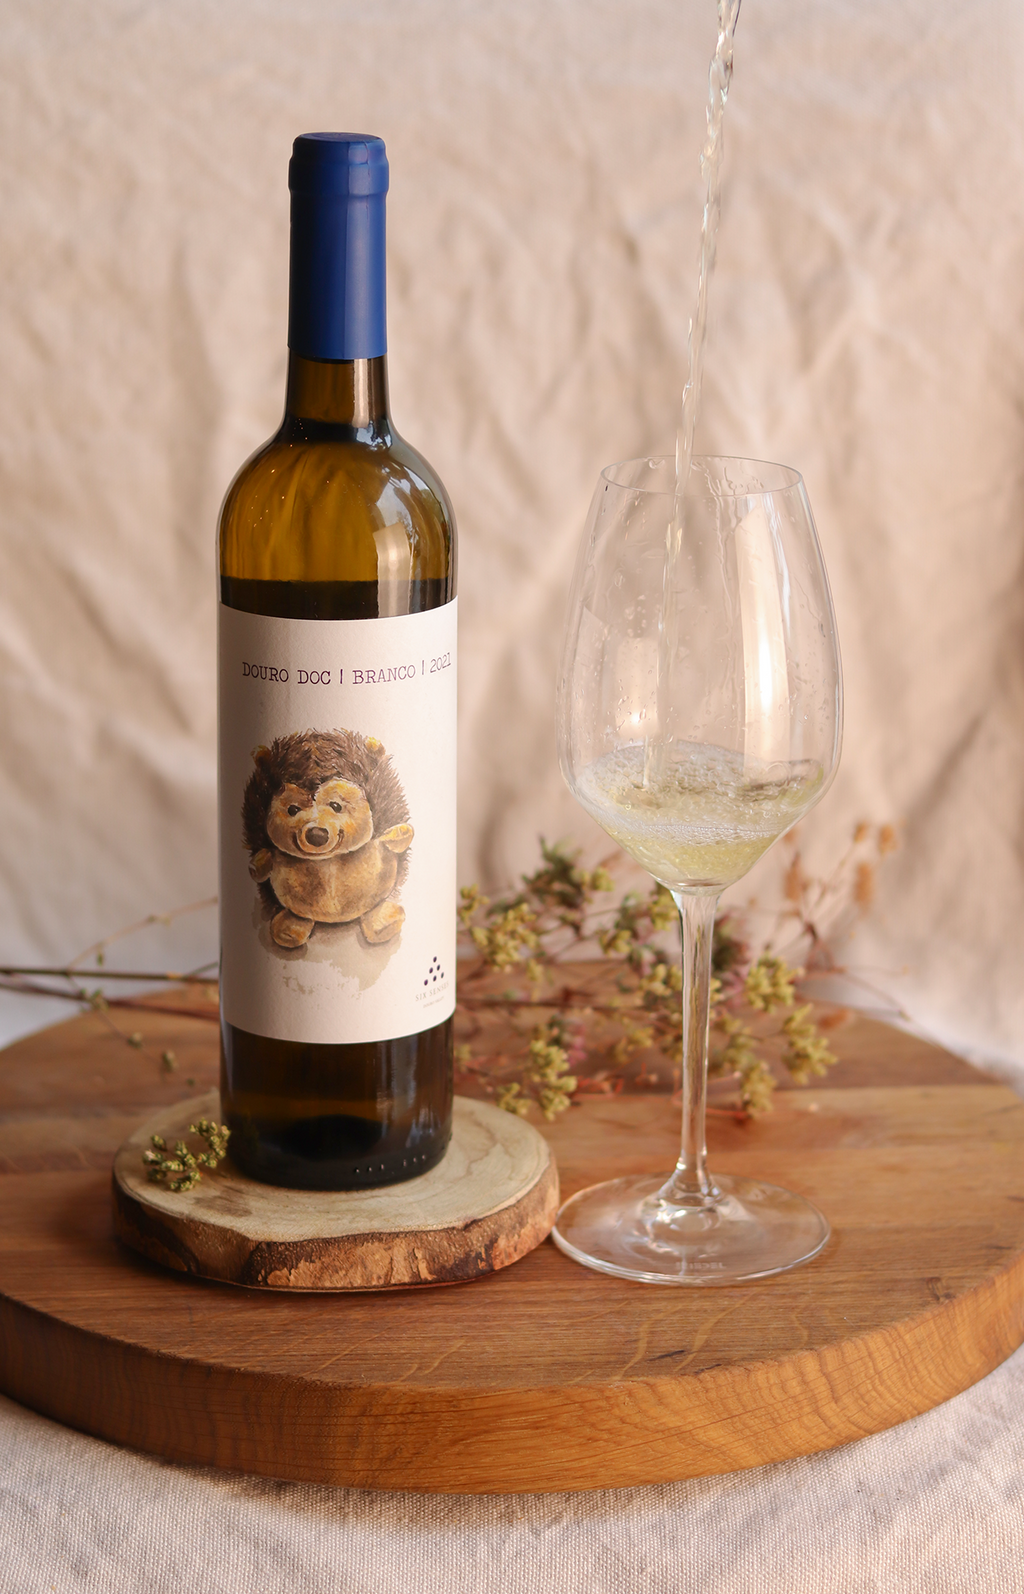 Bottle of Doc white wine from Six Senses, with an illustration of a hedgehog on the label 